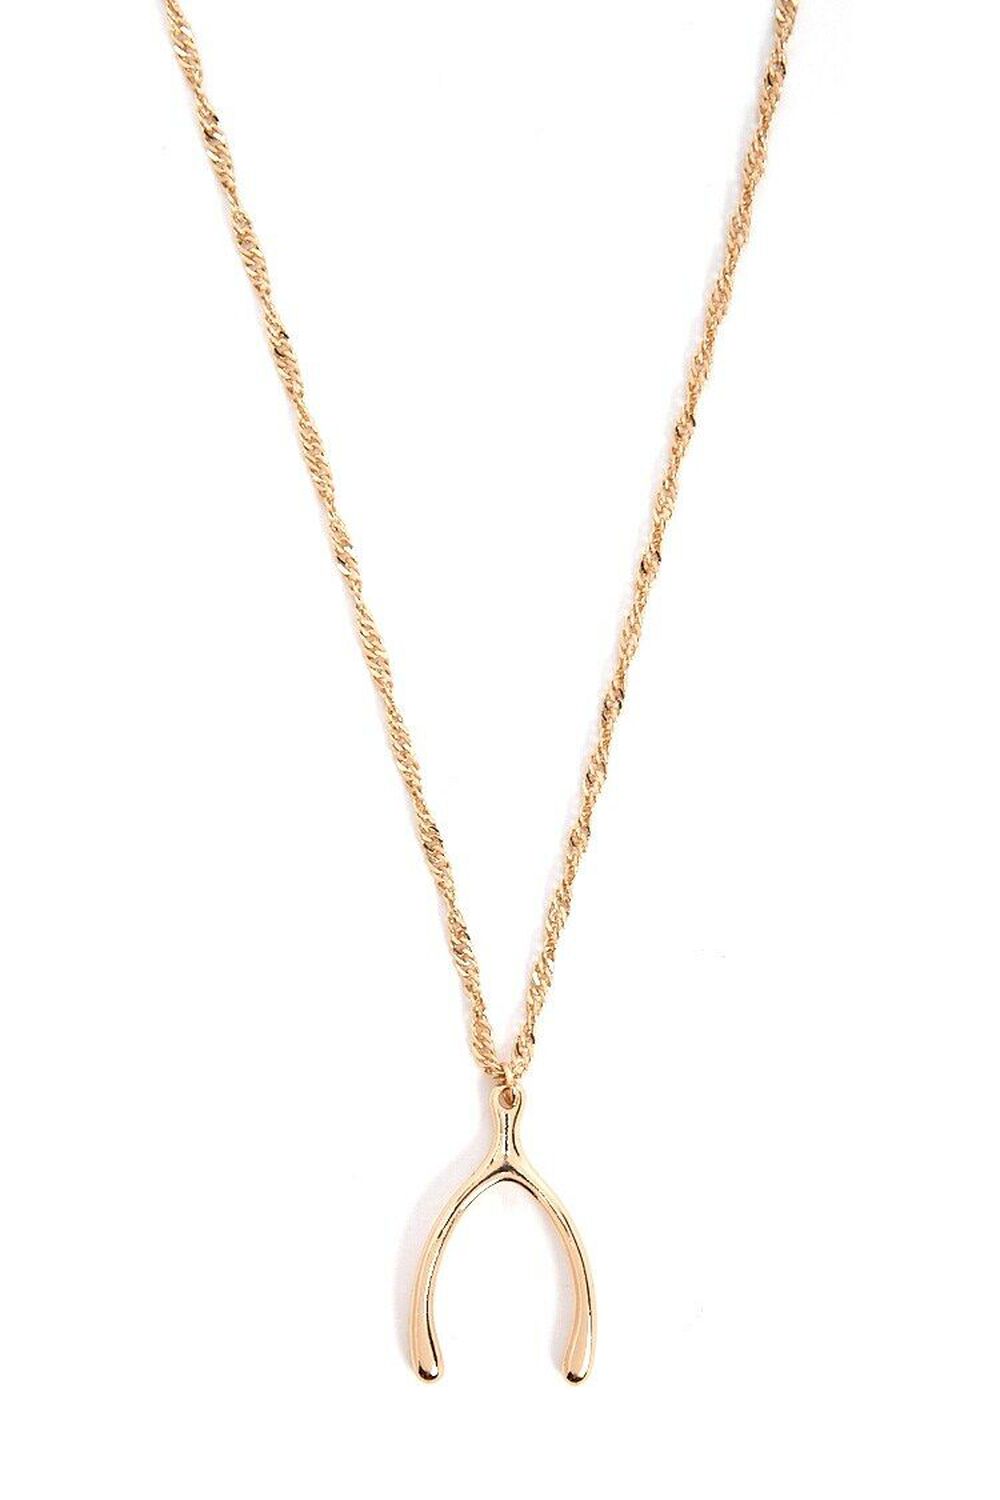 GOLD Wishbone Rope Chain Necklace, image 1